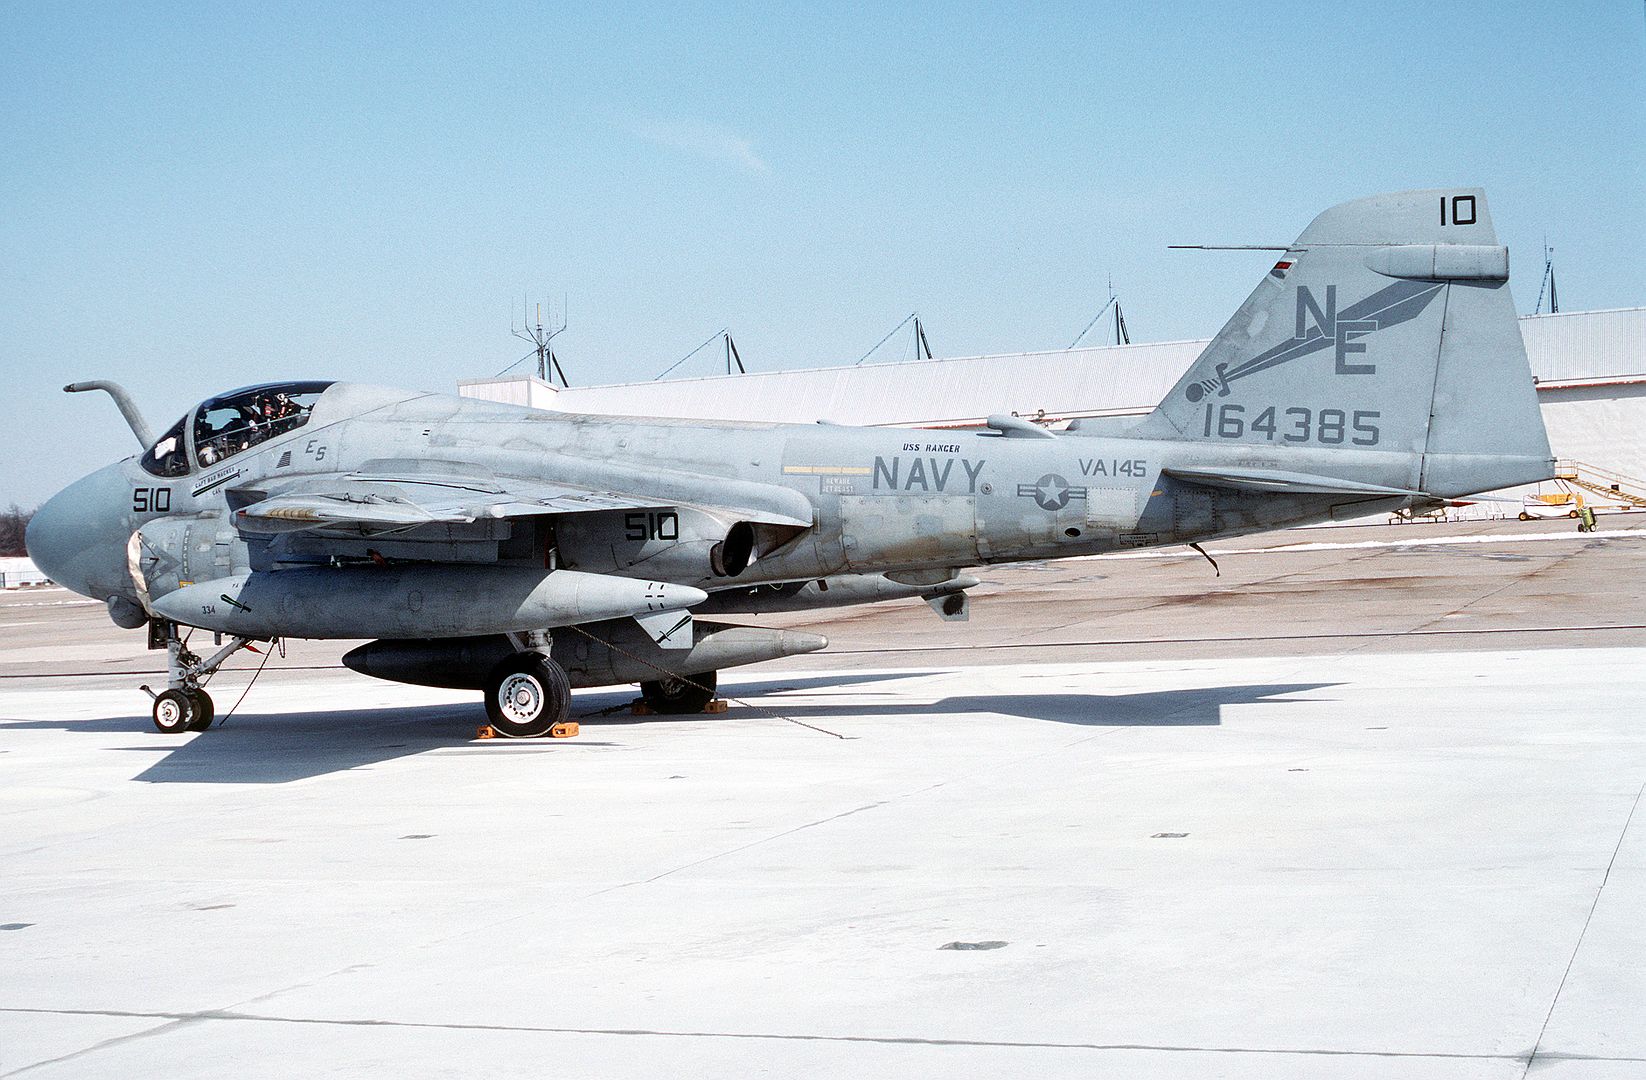 A Left Side View Of An Attack Squadron 145 A 6E Intruder Aircraft Parked On The Flight Line